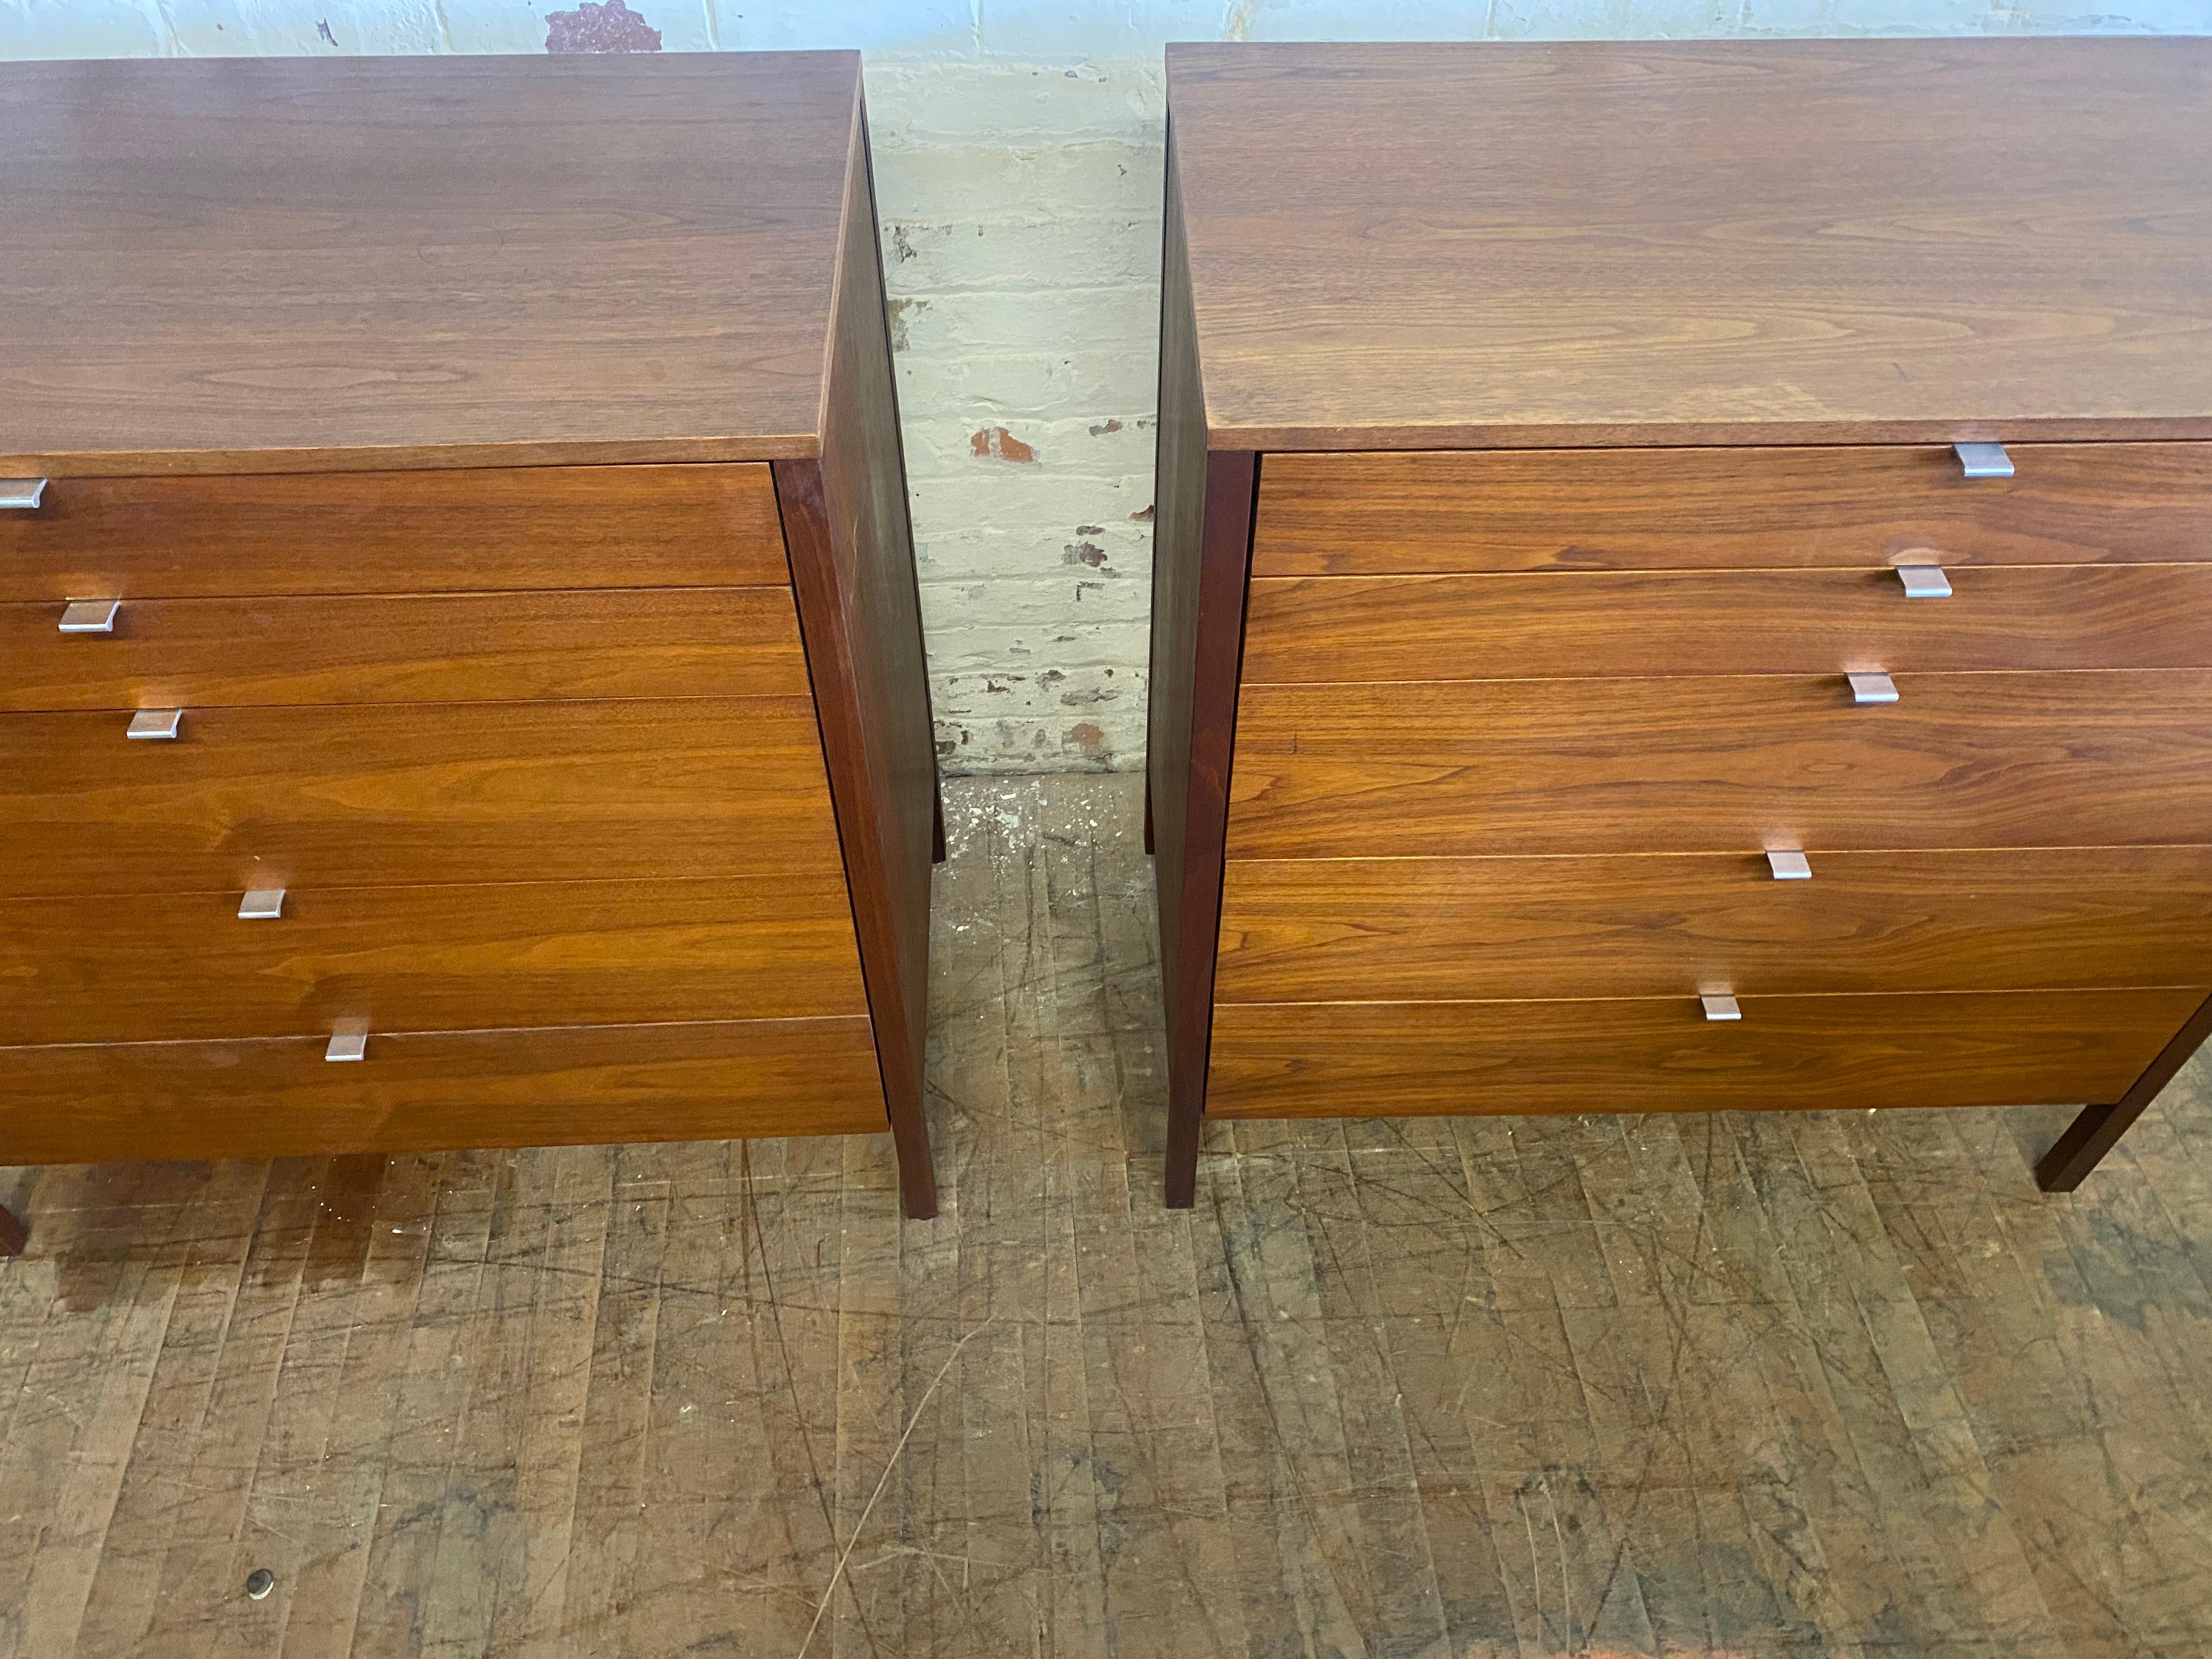 Classic architectural design ,, Early production dresser or chest of drawers designed by Florence Knoll for Knoll International.Retains original KNOLL label.. 

Beautiful walnut grain throughout. Retains the original stainless drawer pulls. Five